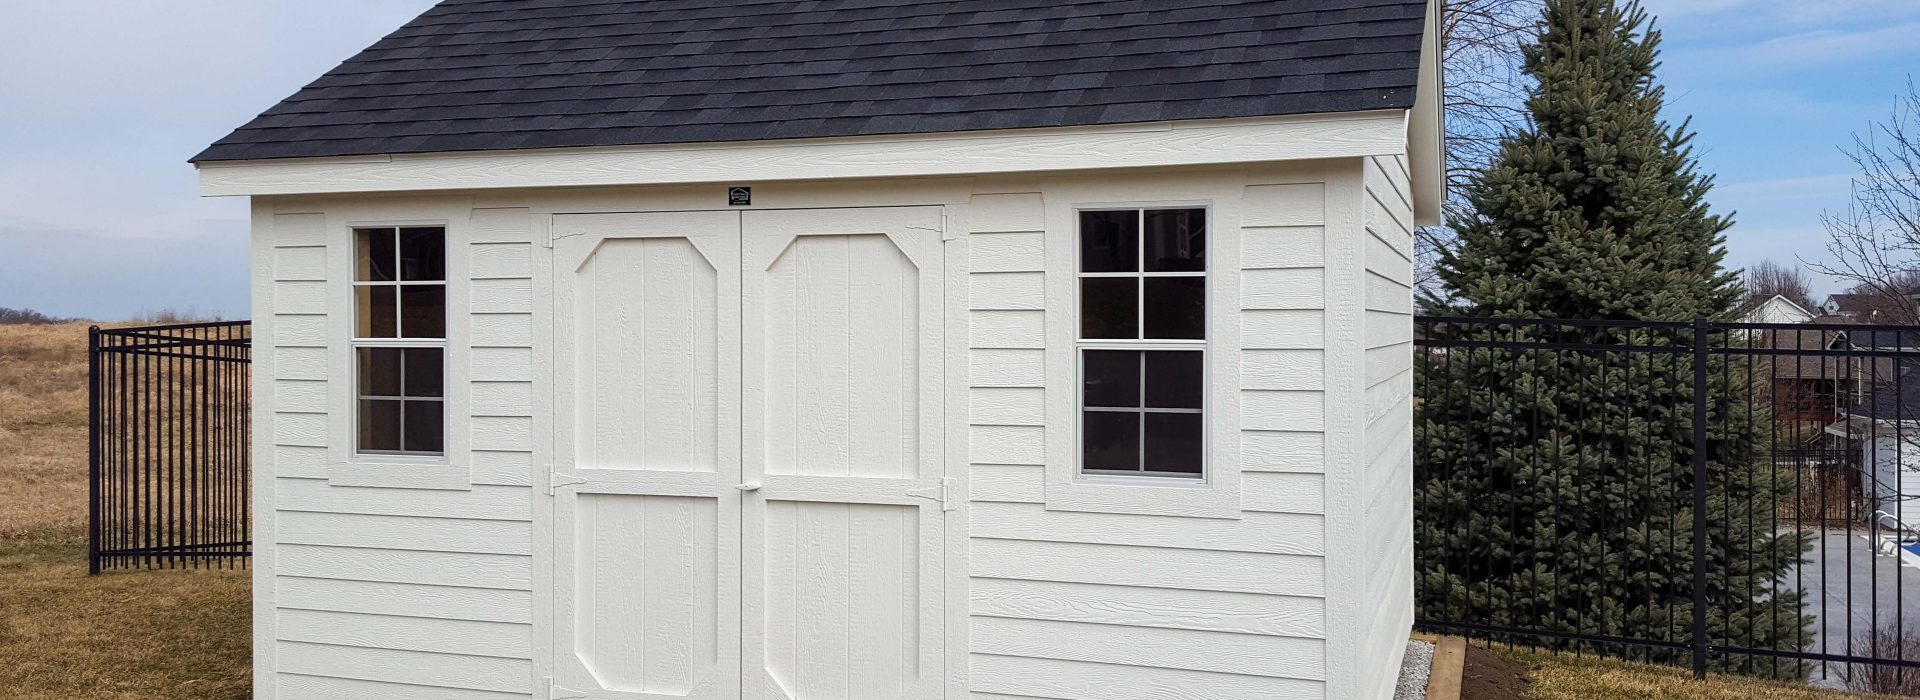 cottage style shed